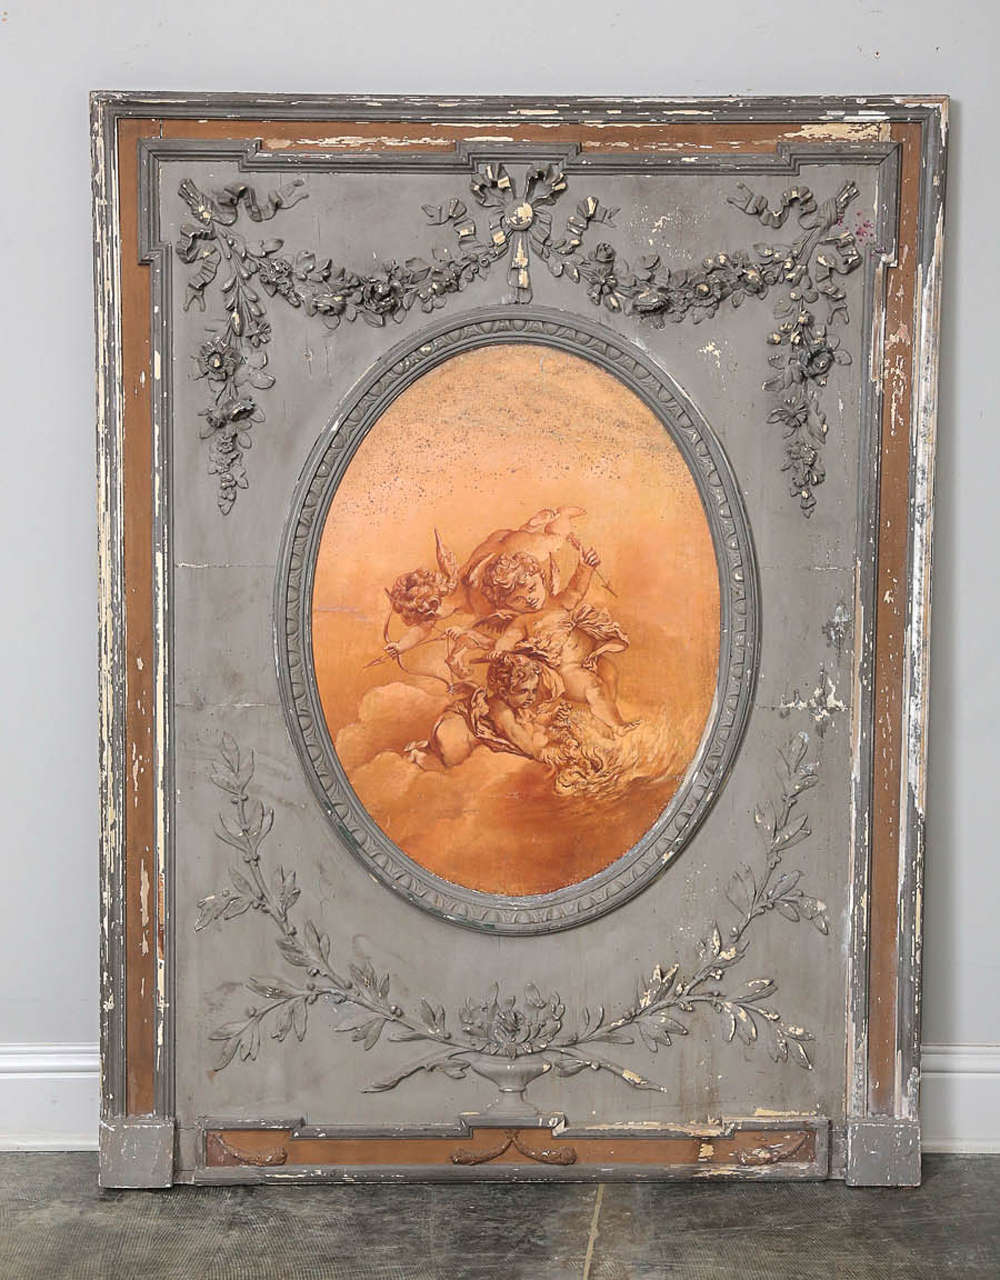 18th Century French boiserie panel with original grisalle painting of Putti; Old paint and gesso.

Established in 1979, Joyce Horn Antiques, ltd. continues its 36 year tradition of being a family owned and operated business specializing in hand